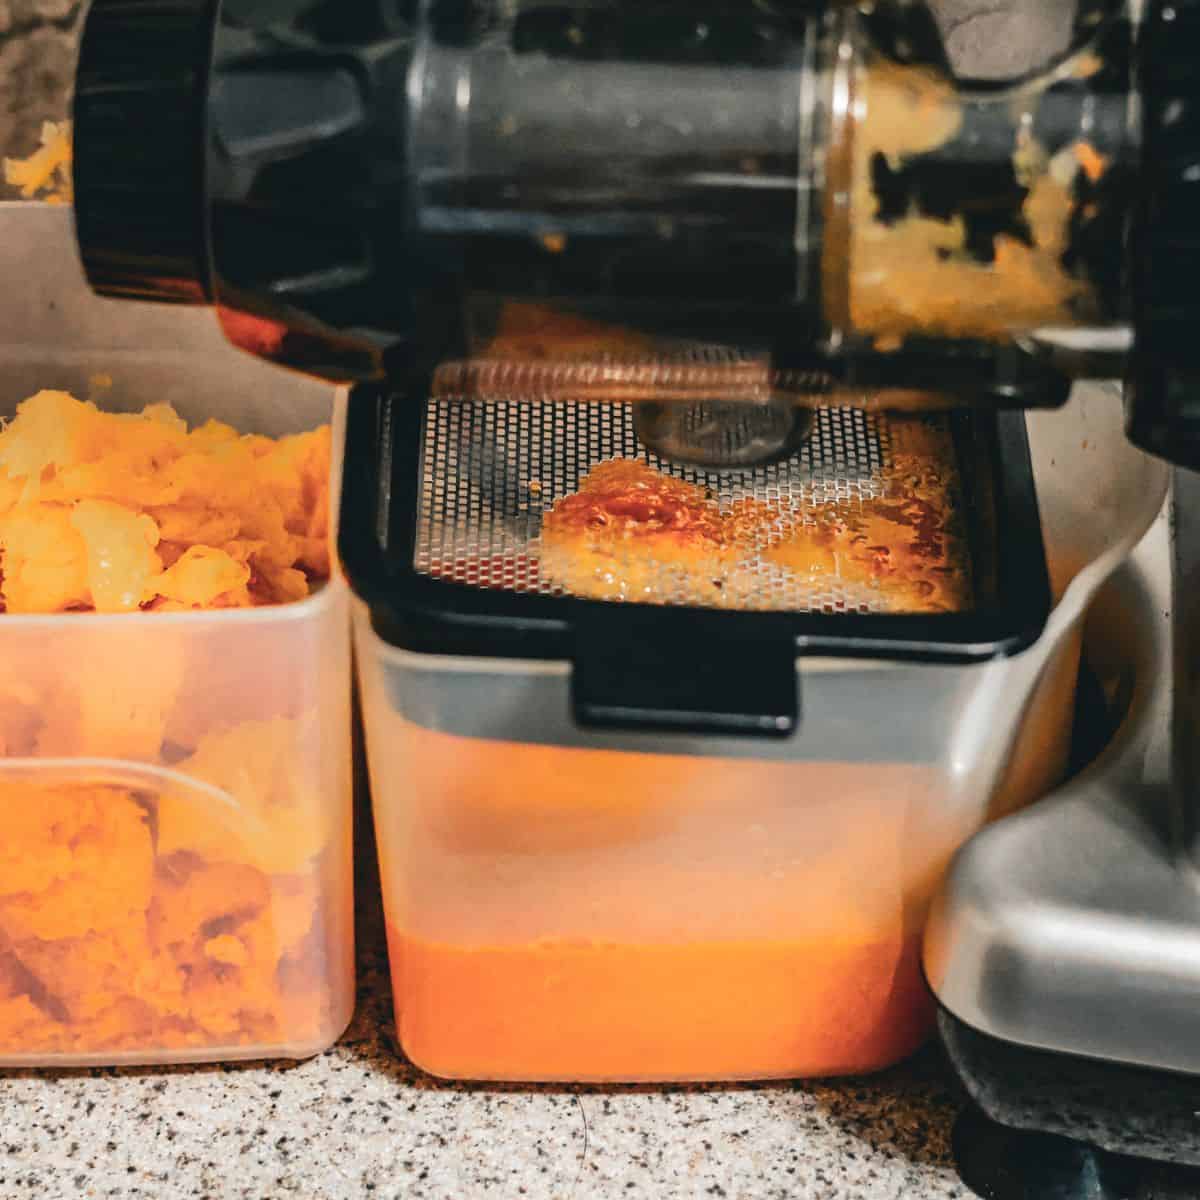 An electric juicer in the midst of extracting vibrant orange juice from fresh produce. The juiced fiber is being ejected into one compartment, while the silky, fresh juice is collected in a clear container below, ready for enjoyment.